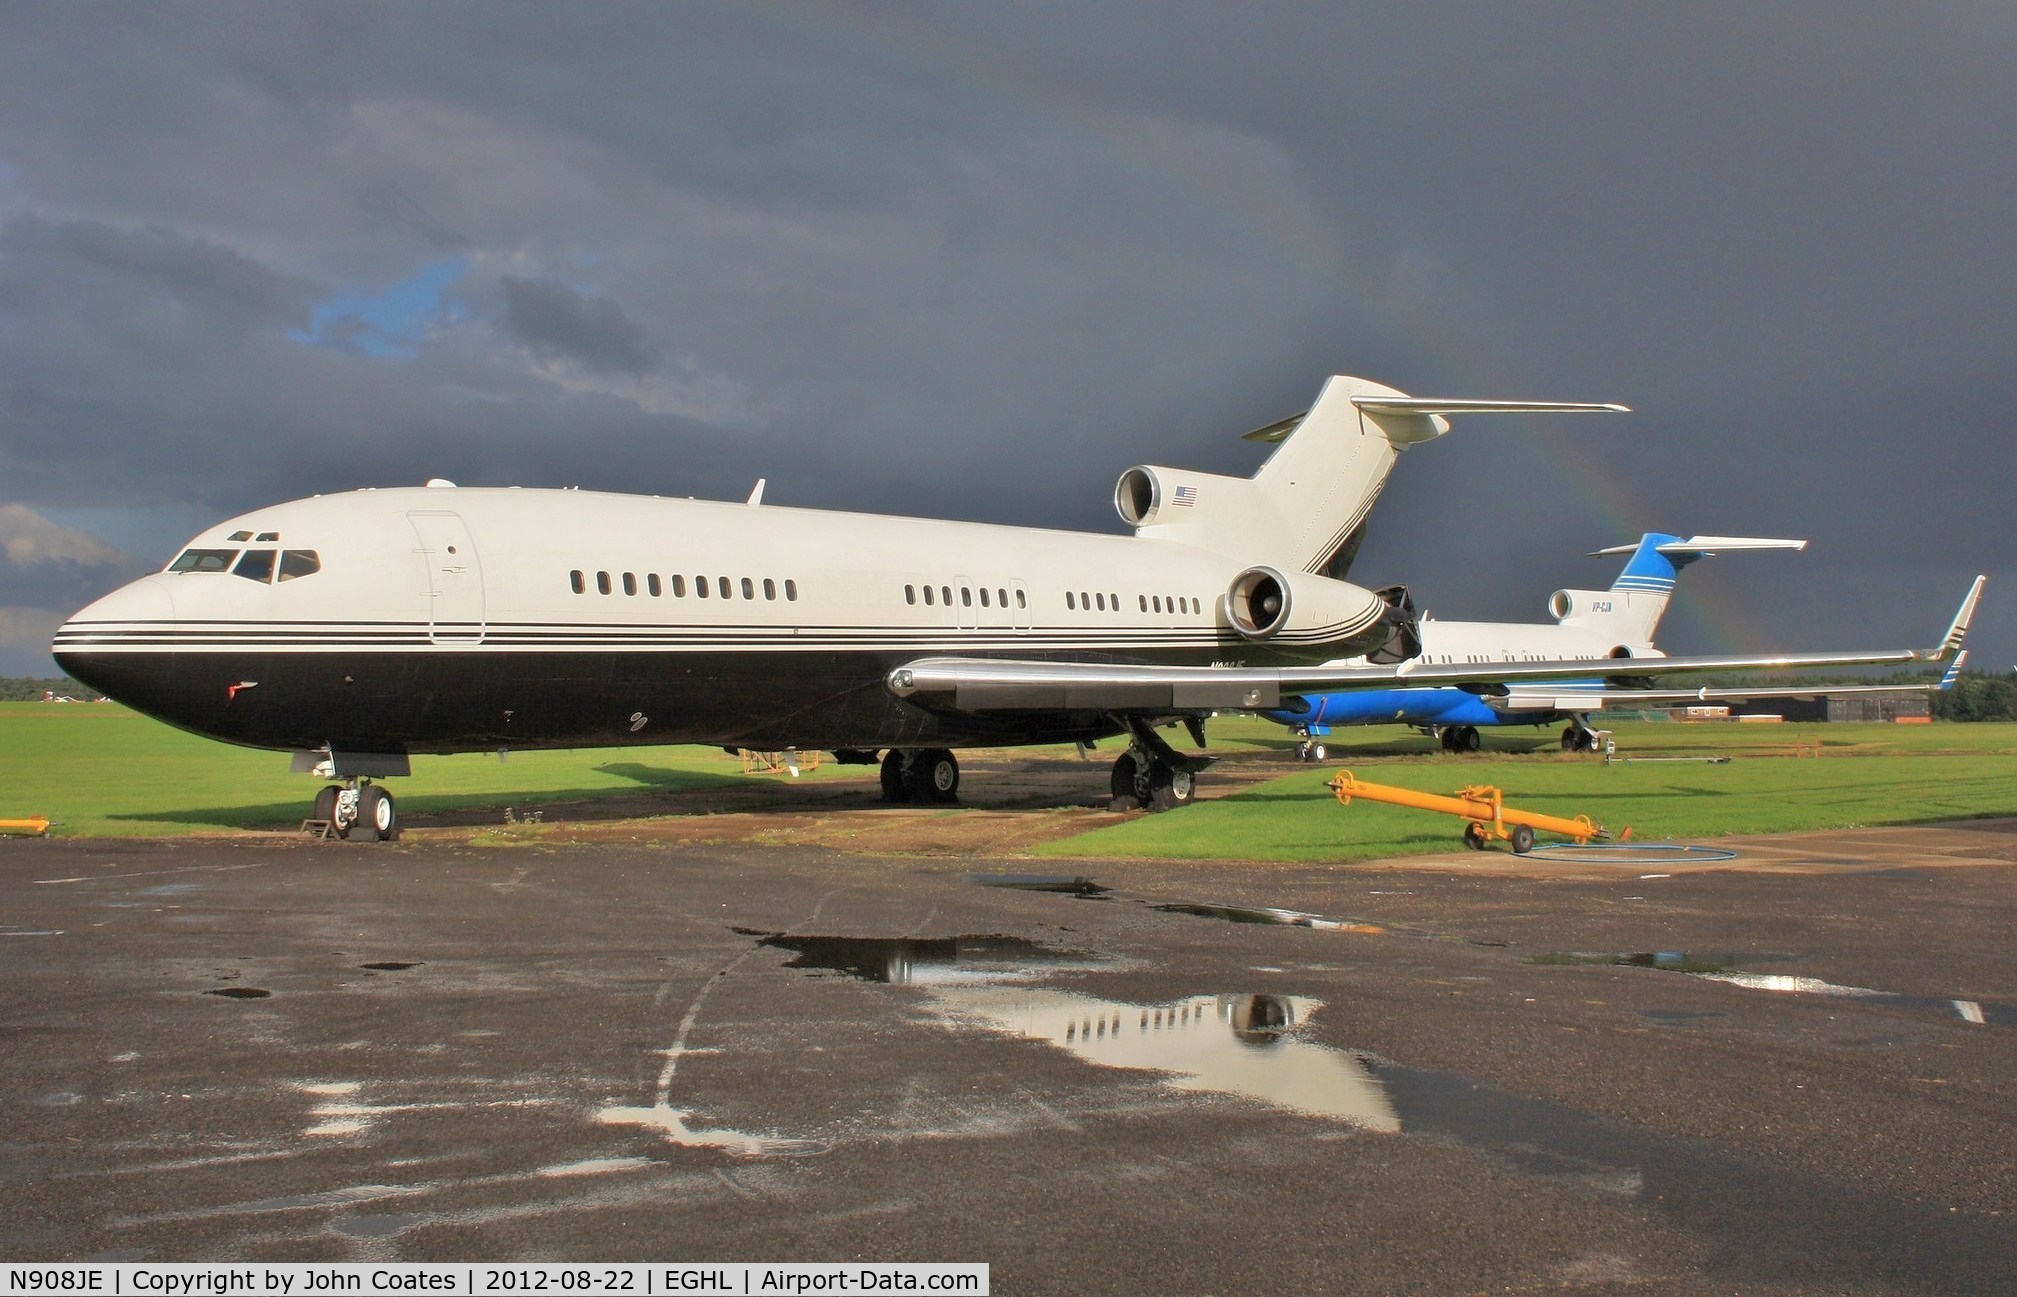 N908JE, 1969 Boeing 727-31 C/N 20115, After the storm at ATC